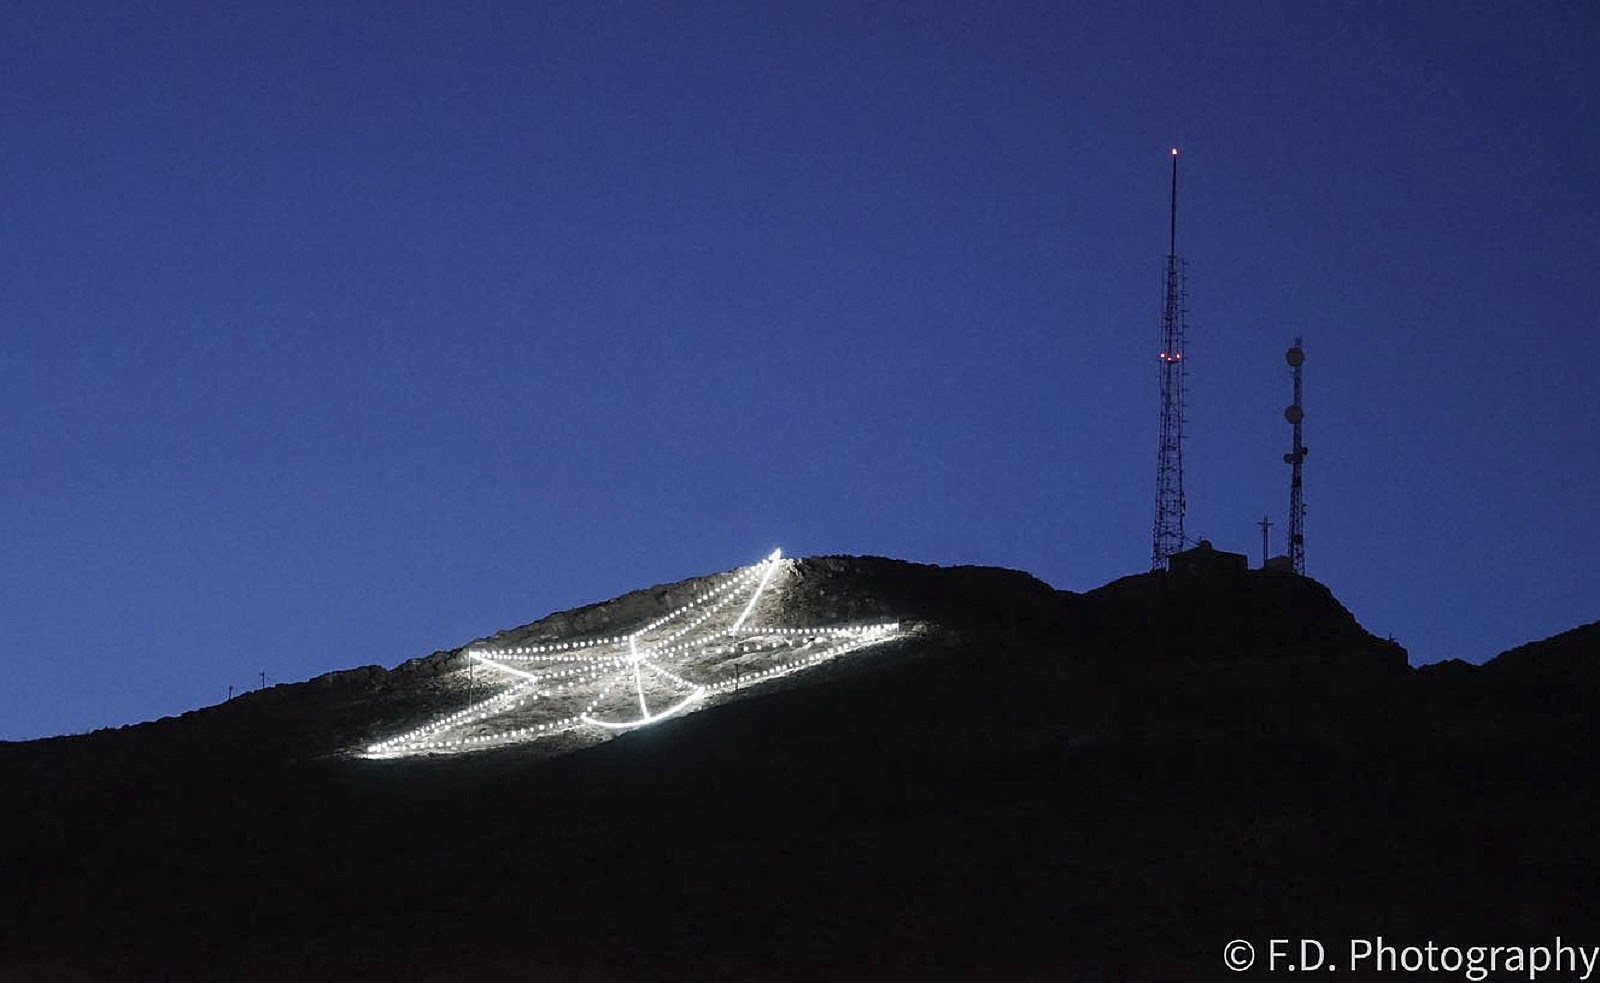 Why the El Paso Star on the Mountain Has Gone Dark This Time